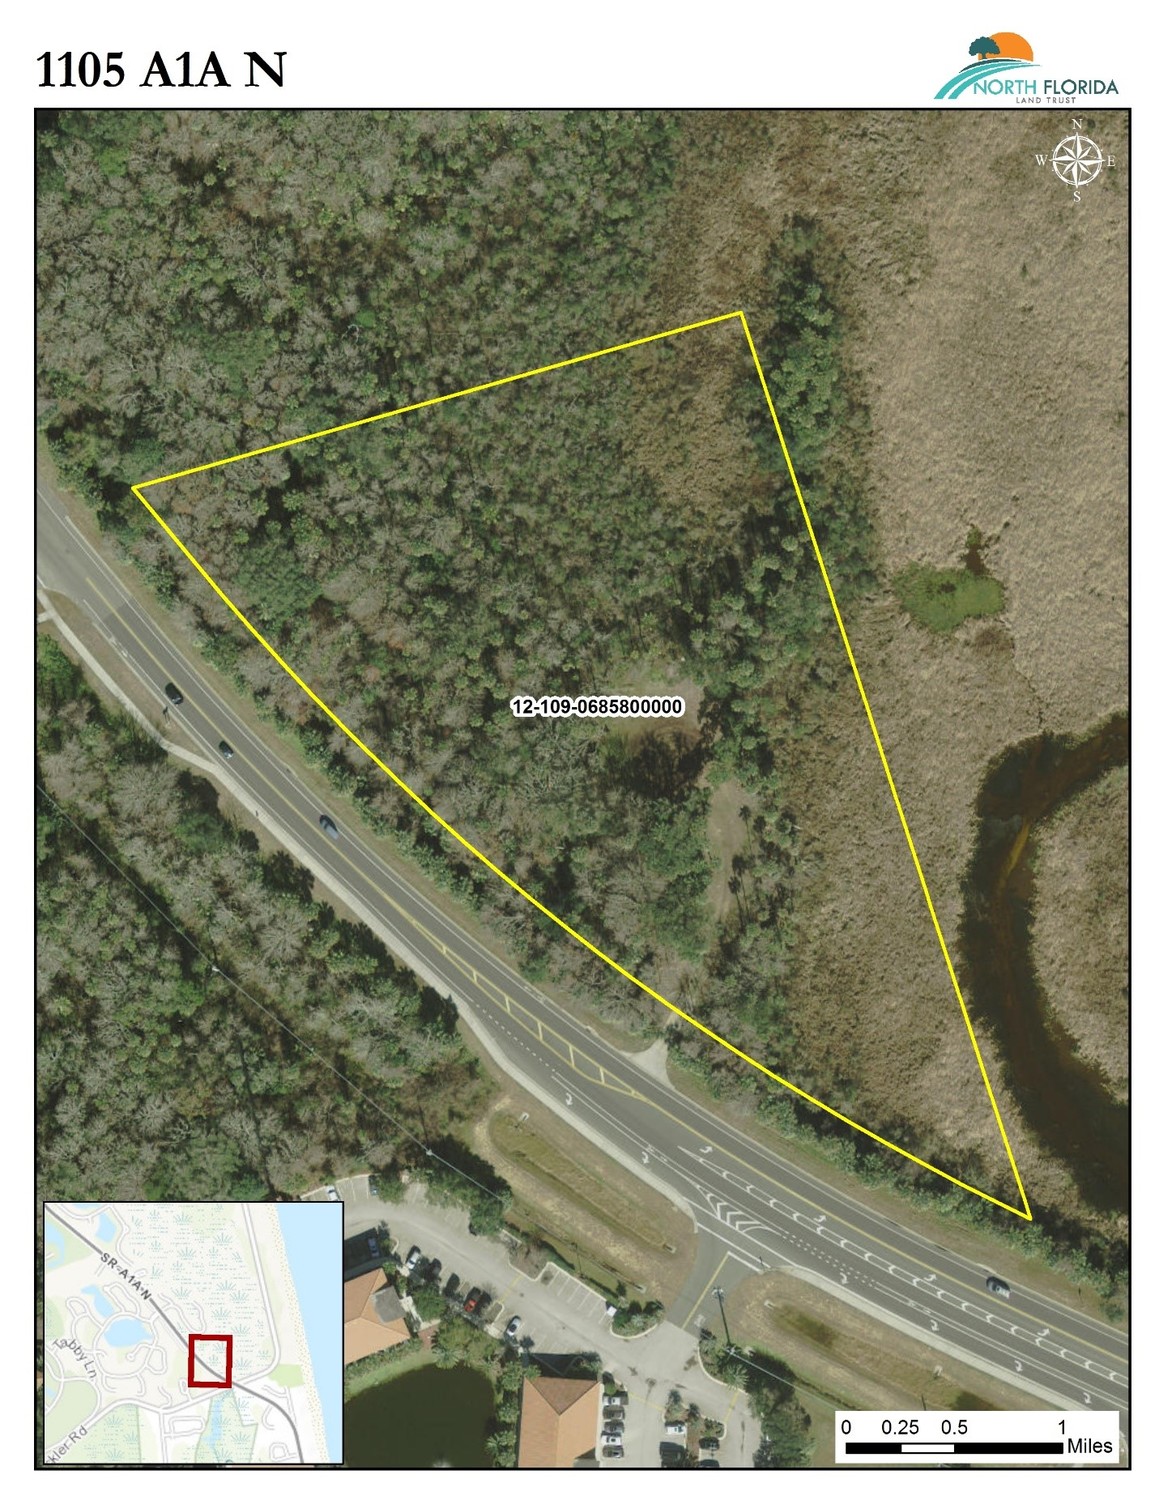 A wetland parcel with 0.55 acres of uplands, this property is advertised for residential or multifamily development.  Located along A1A, the parcel abuts North Florida Land Trust’s Gloria Child Goelz Preserve to the east. The uplands contain a mixture of live oak hammock and cabbage palm, surrounded by the freshwater wetlands of the Guana River.